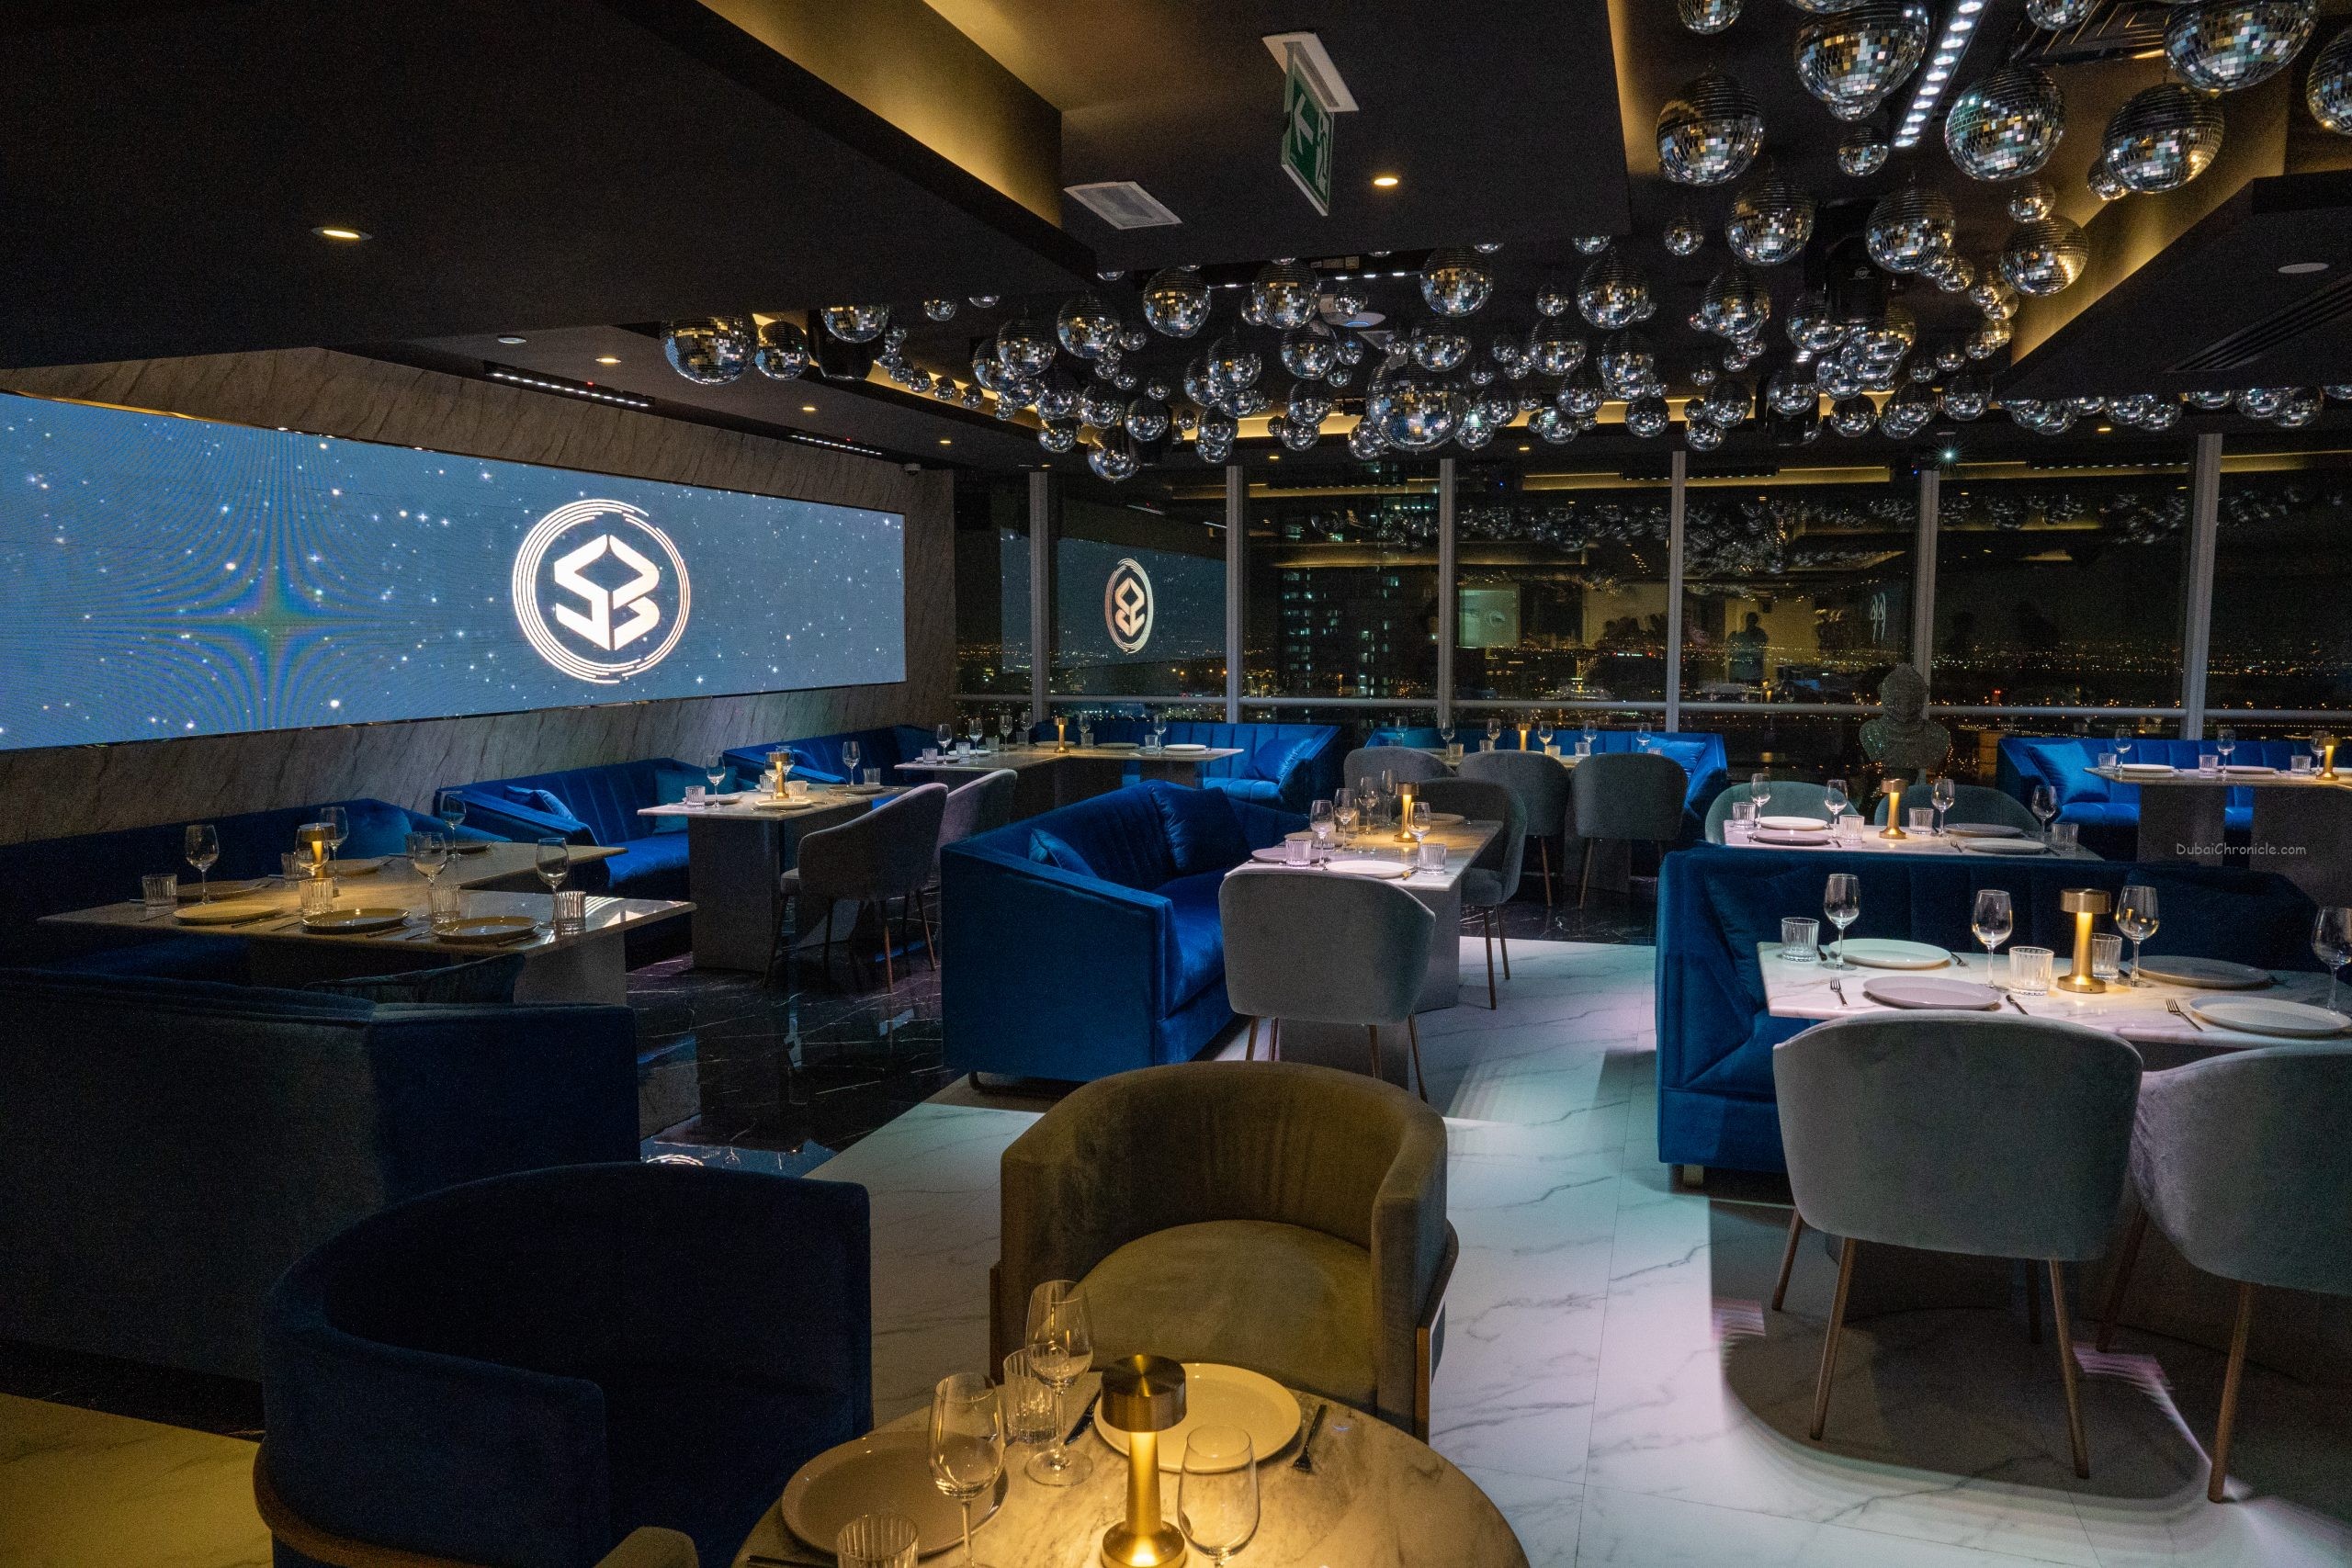 53 is the highest dinner show in the GCC, located on the 53rd floor of the Sheraton Grand Hotel on Sheik Zayed Road, is finally opening its doors on June 15,  2022.